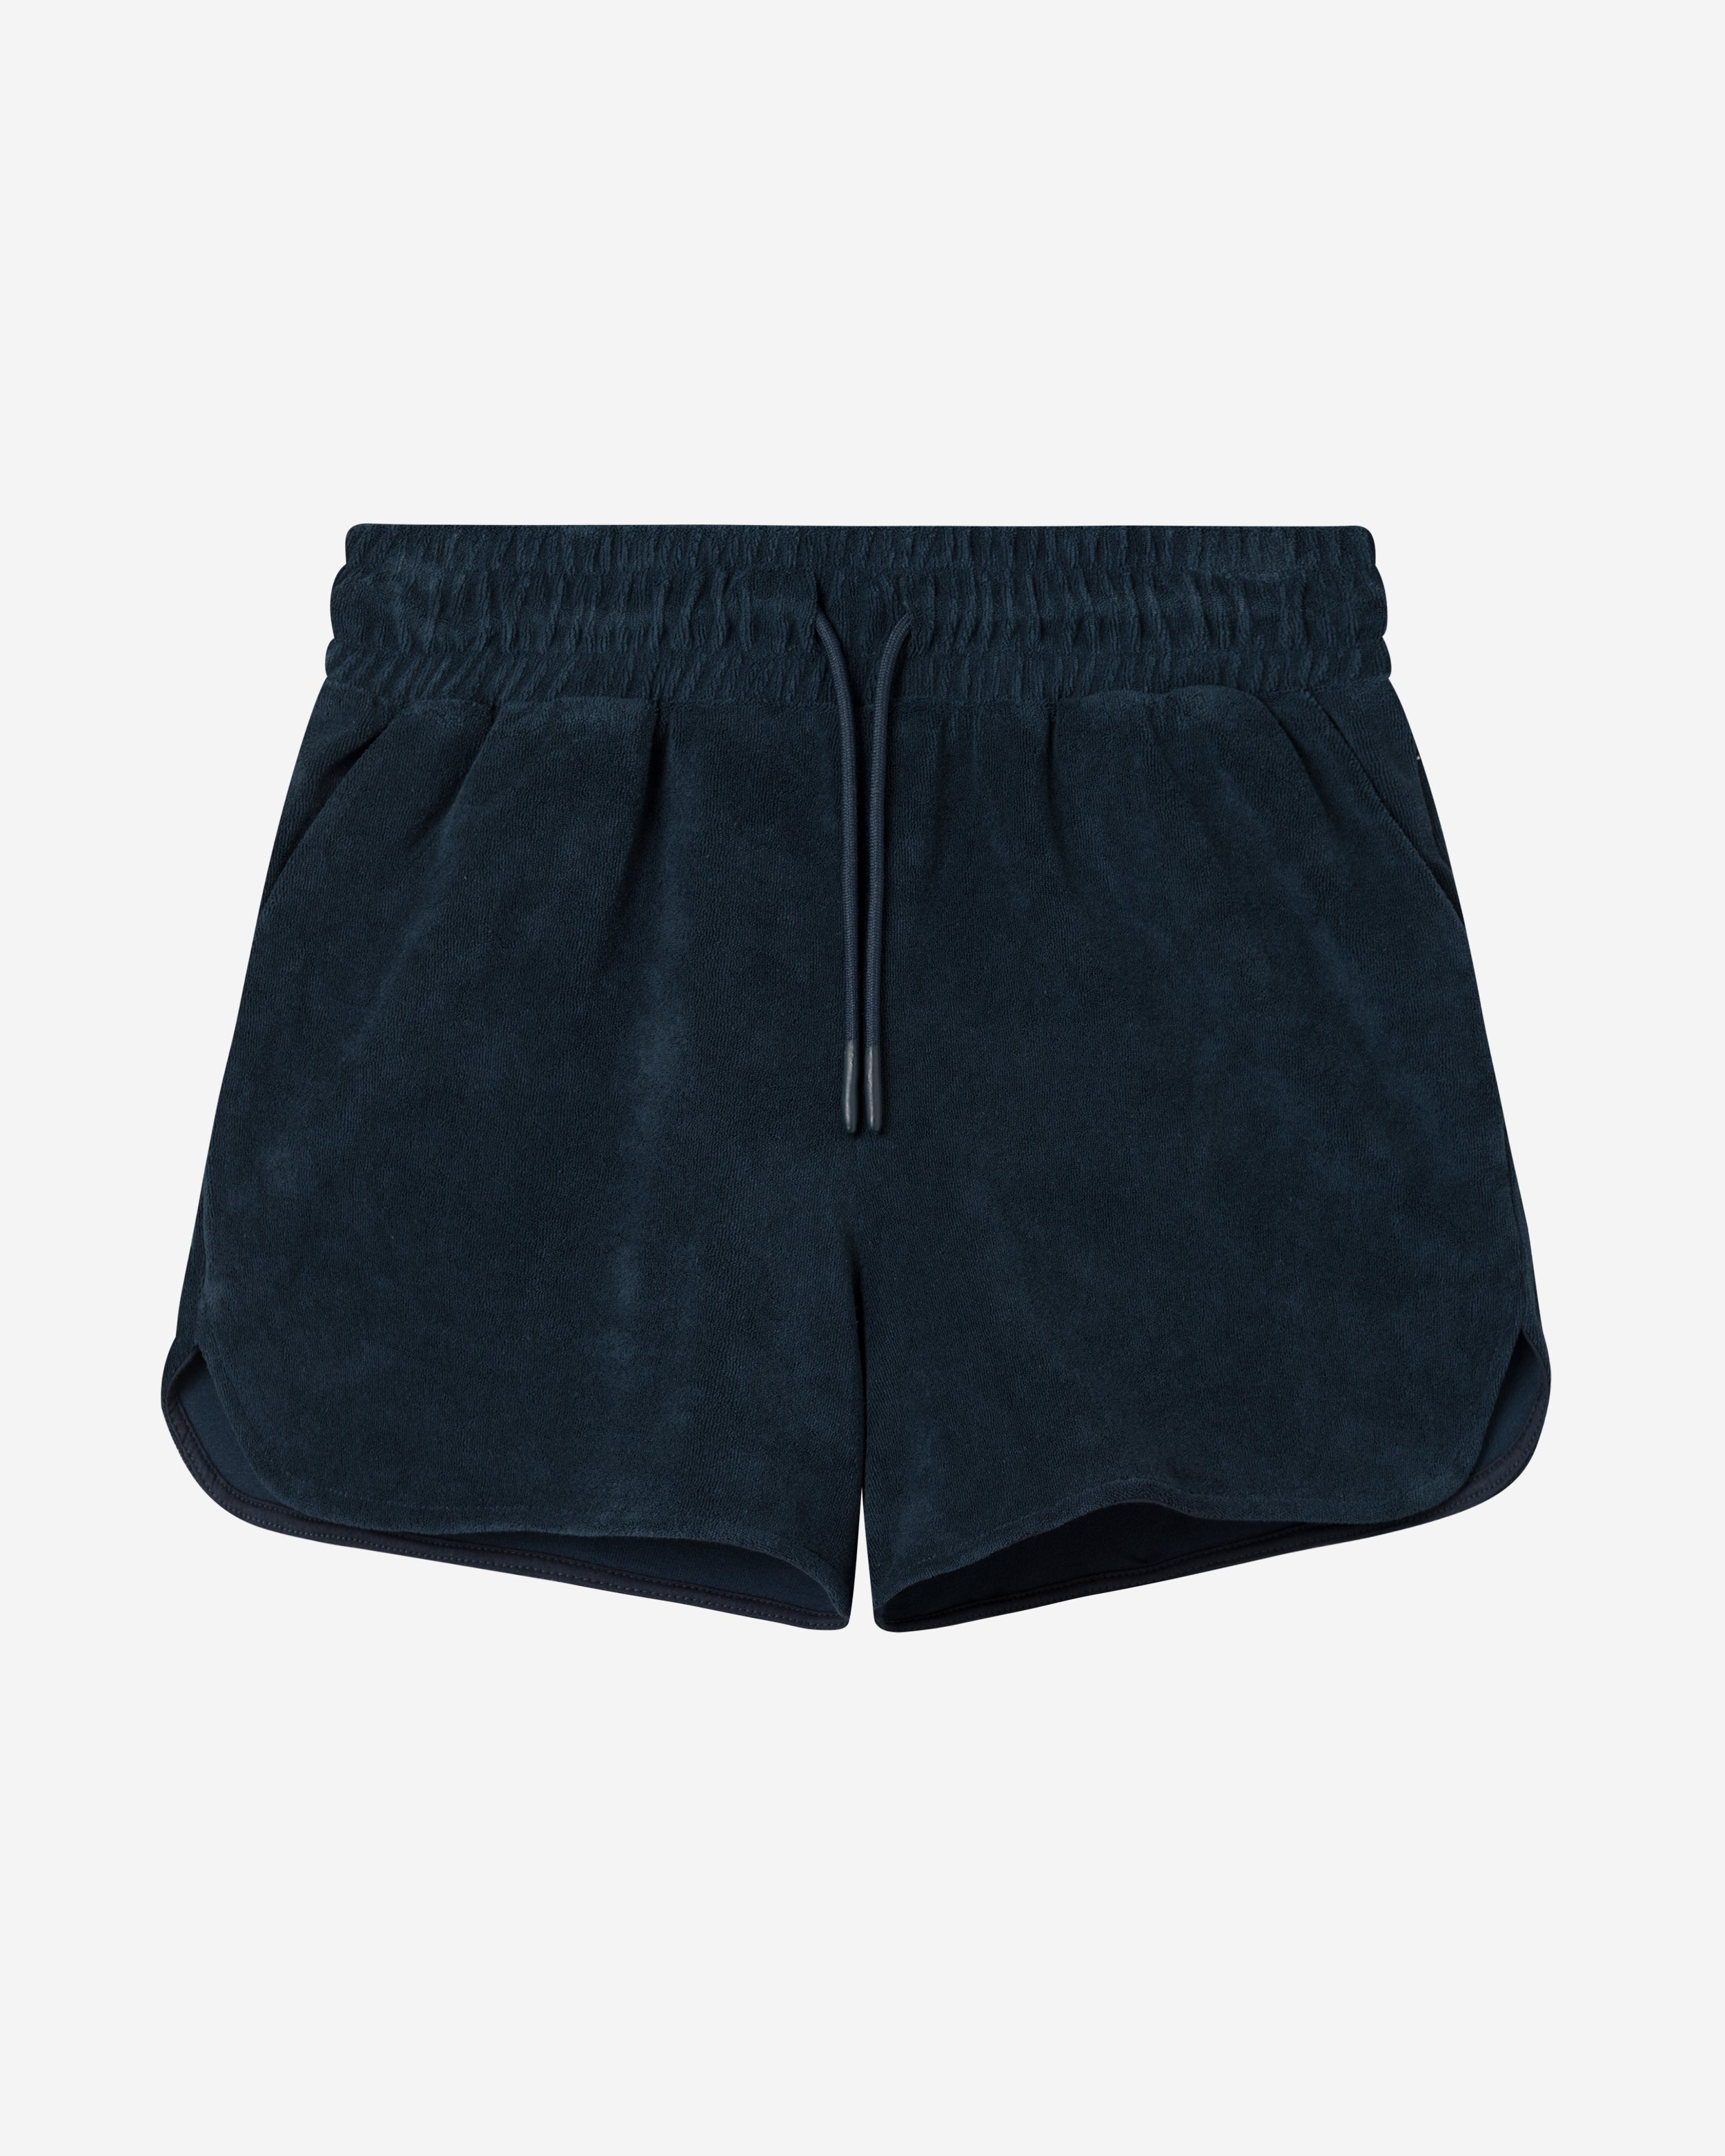 Navy colored low cut shorts in terry toweling fabric with drawstring and two side pockets.